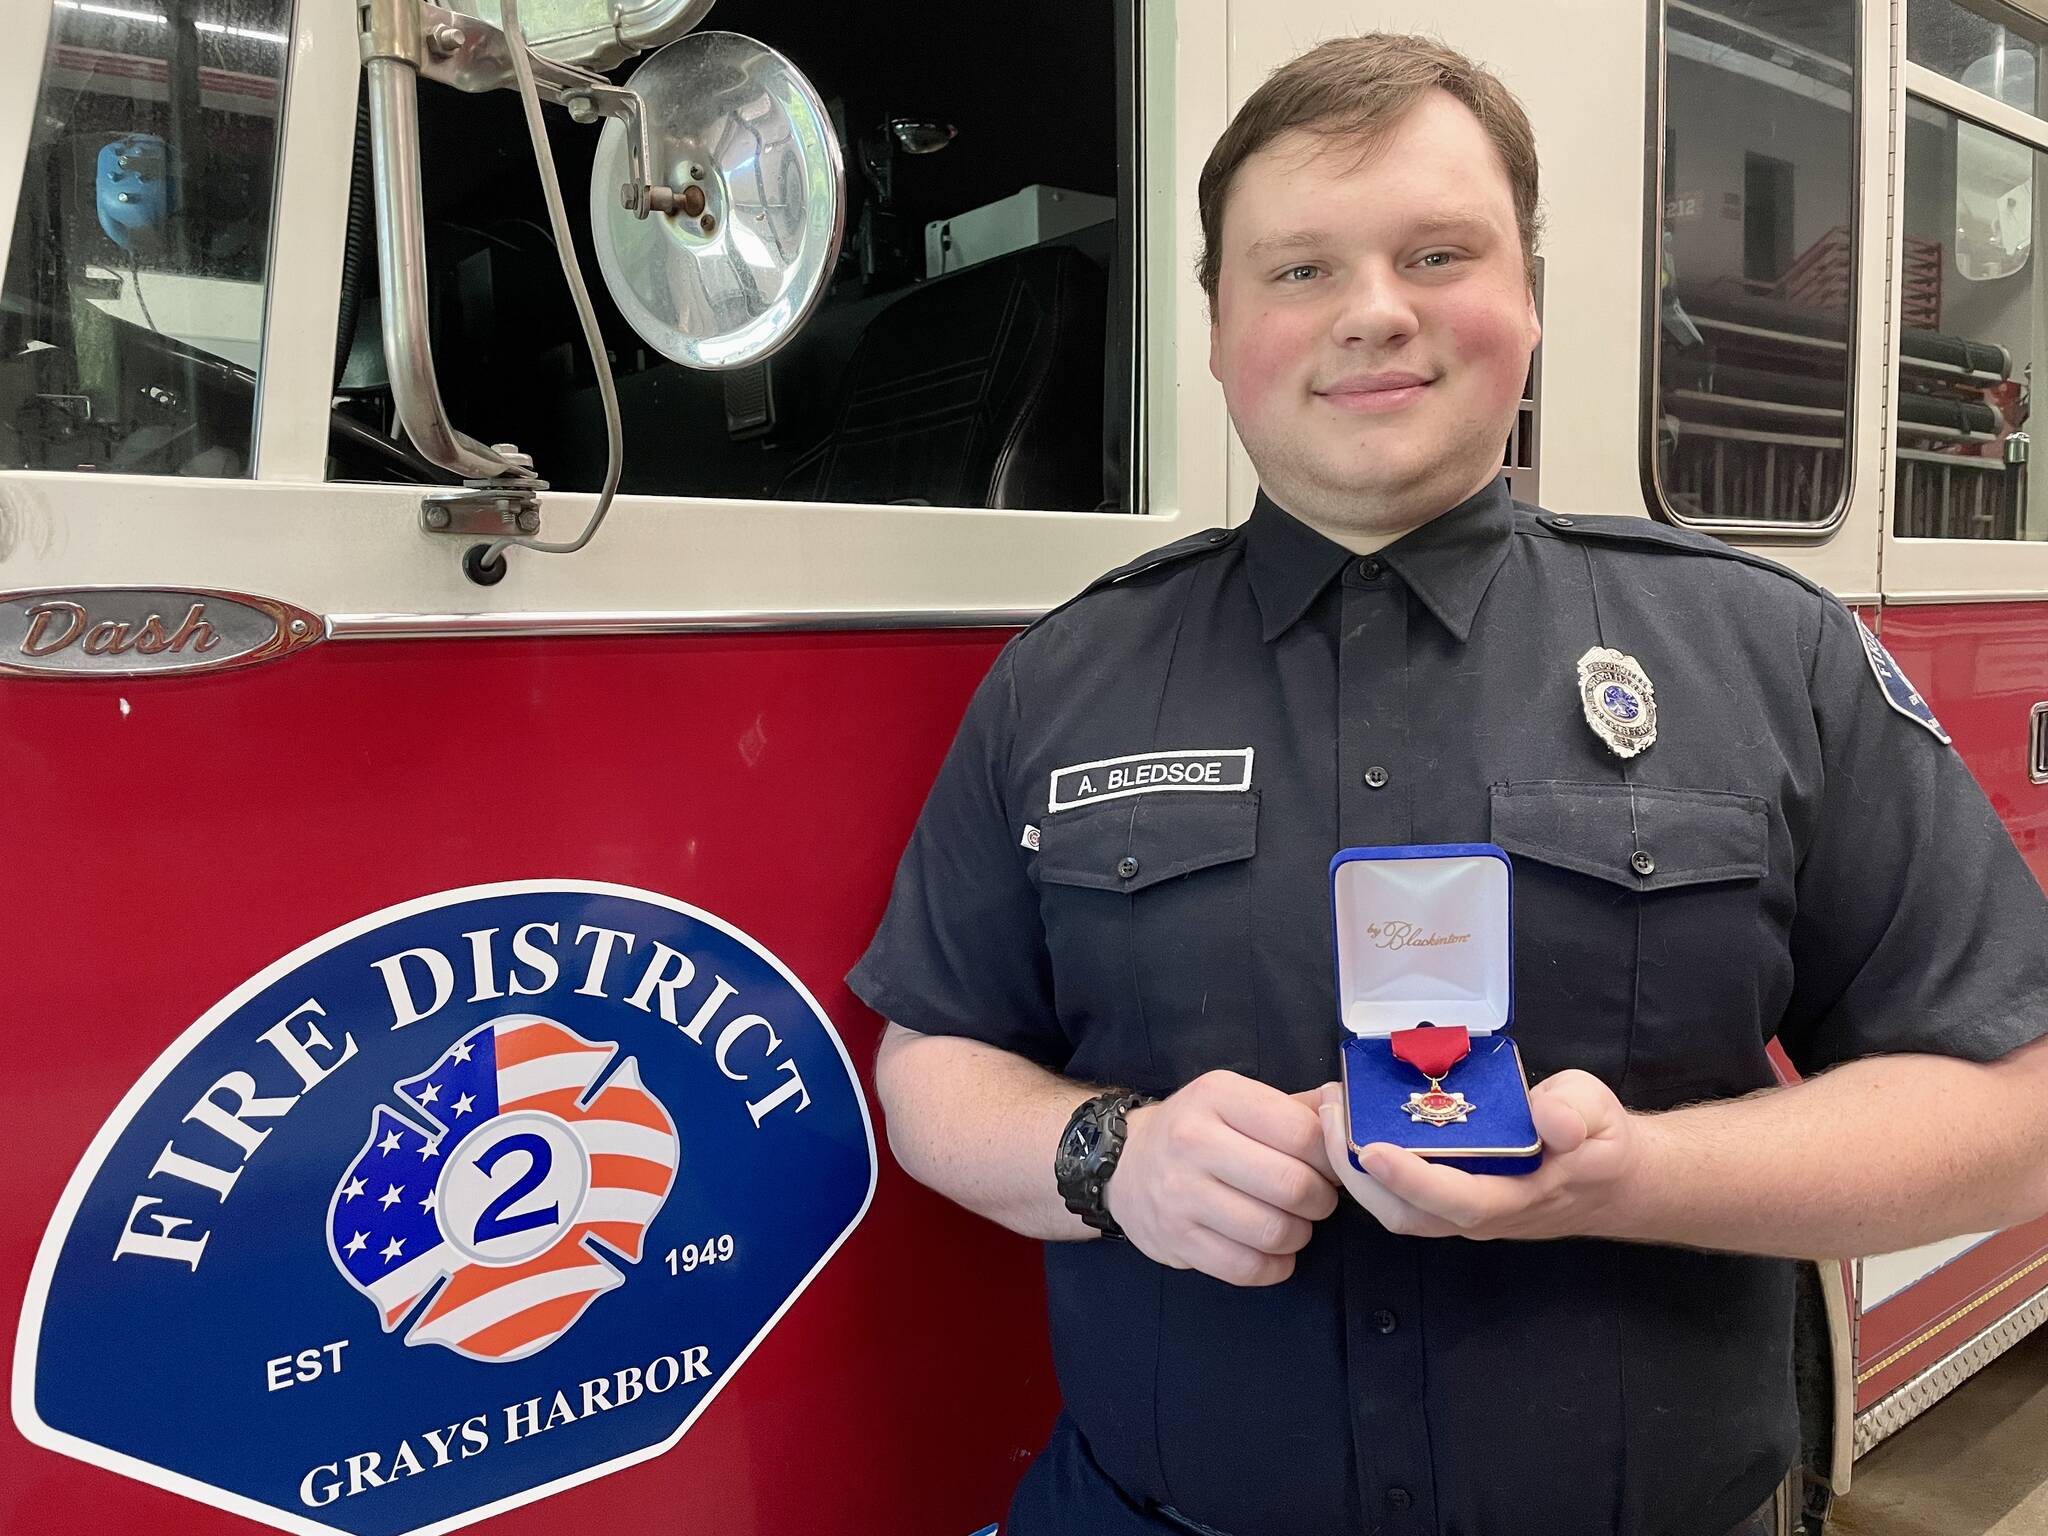 Volunteer Firefighter Aaron Bledsoe was recognized by Grays Harbor Fire District 2 for actions taken in a fire near his home with the Life Saving Medal. (Michael S. Lockett / The Daily World)